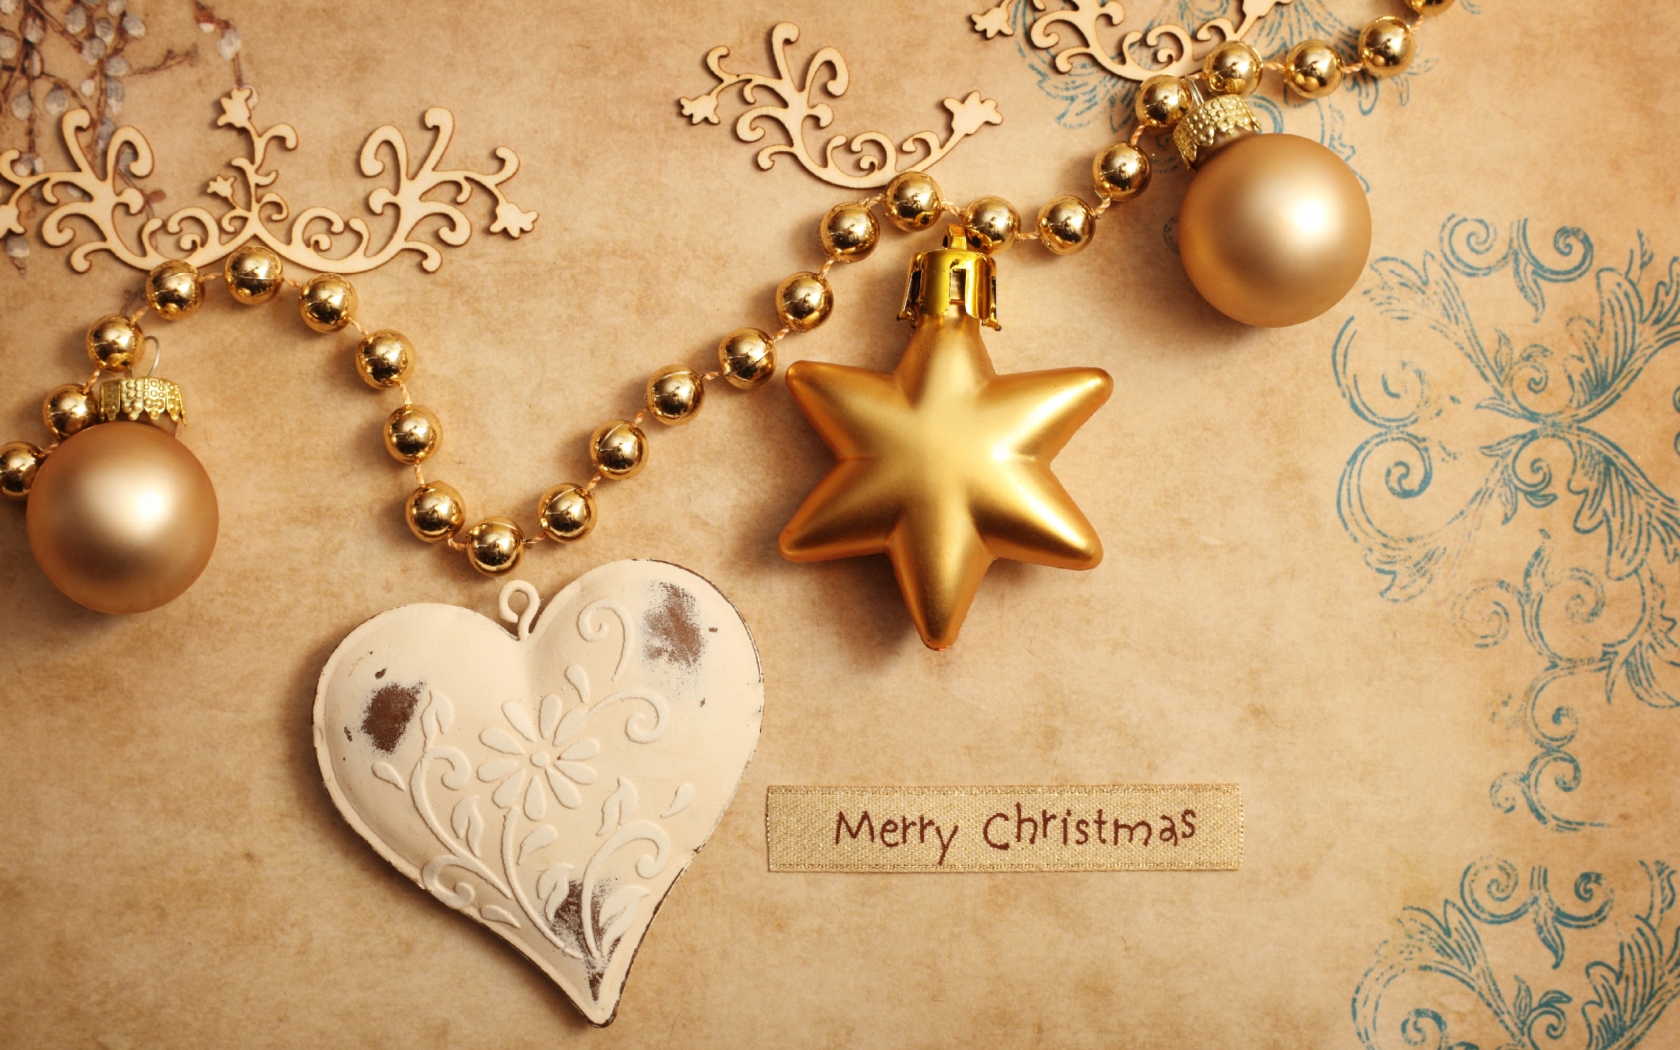 Merry Christmas Card for 1680 x 1050 widescreen resolution